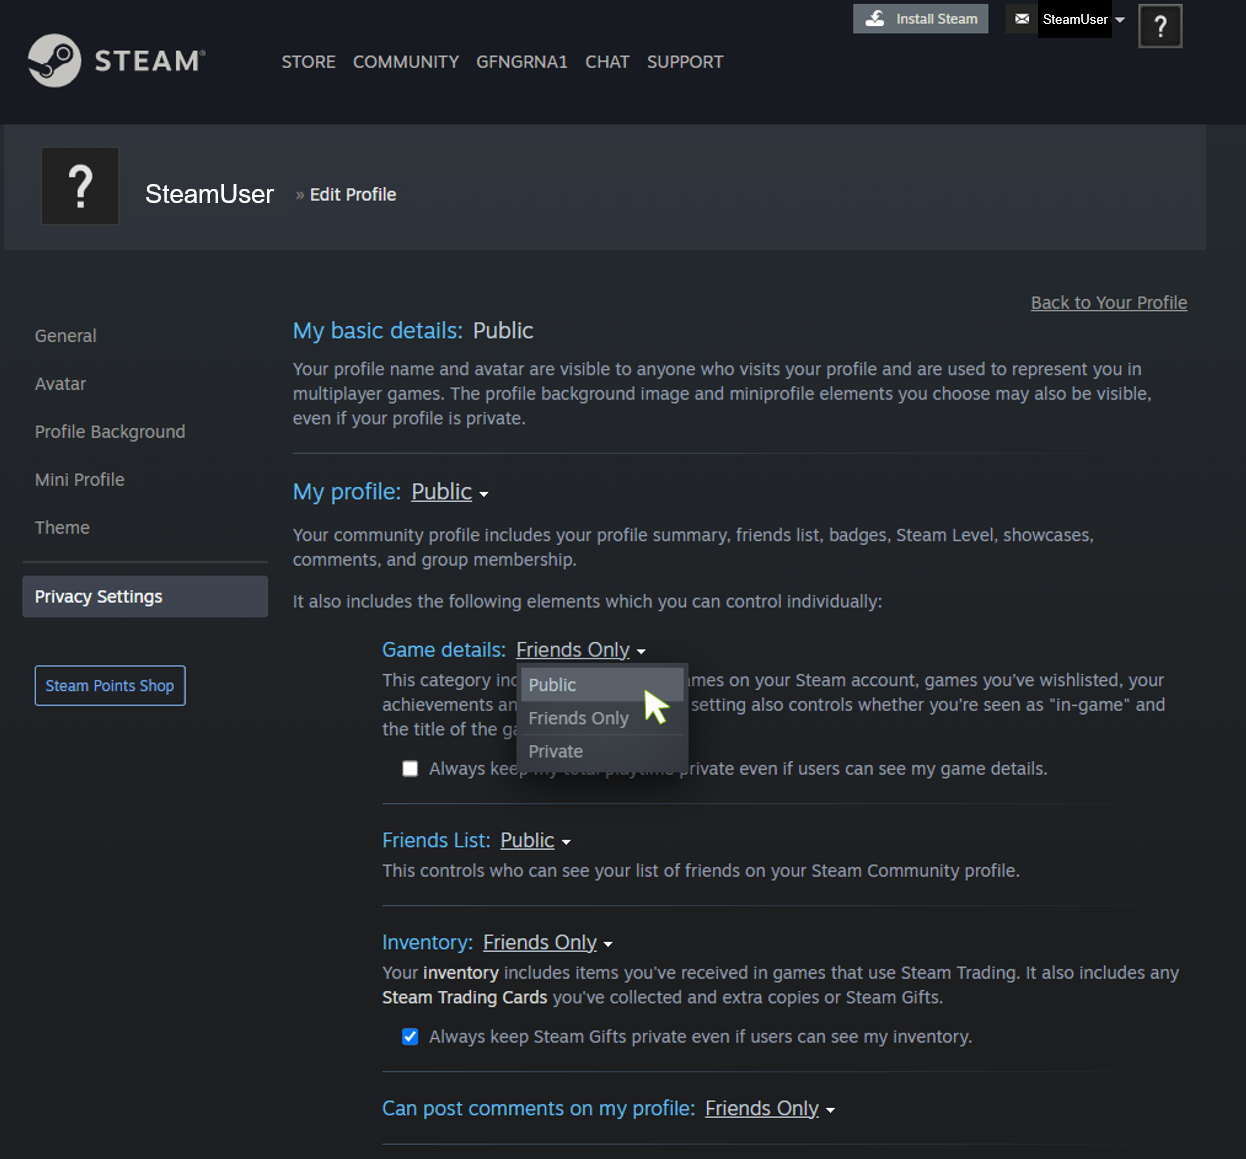 How do I create a Steam account to use with GeForce NOW? | NVIDIA